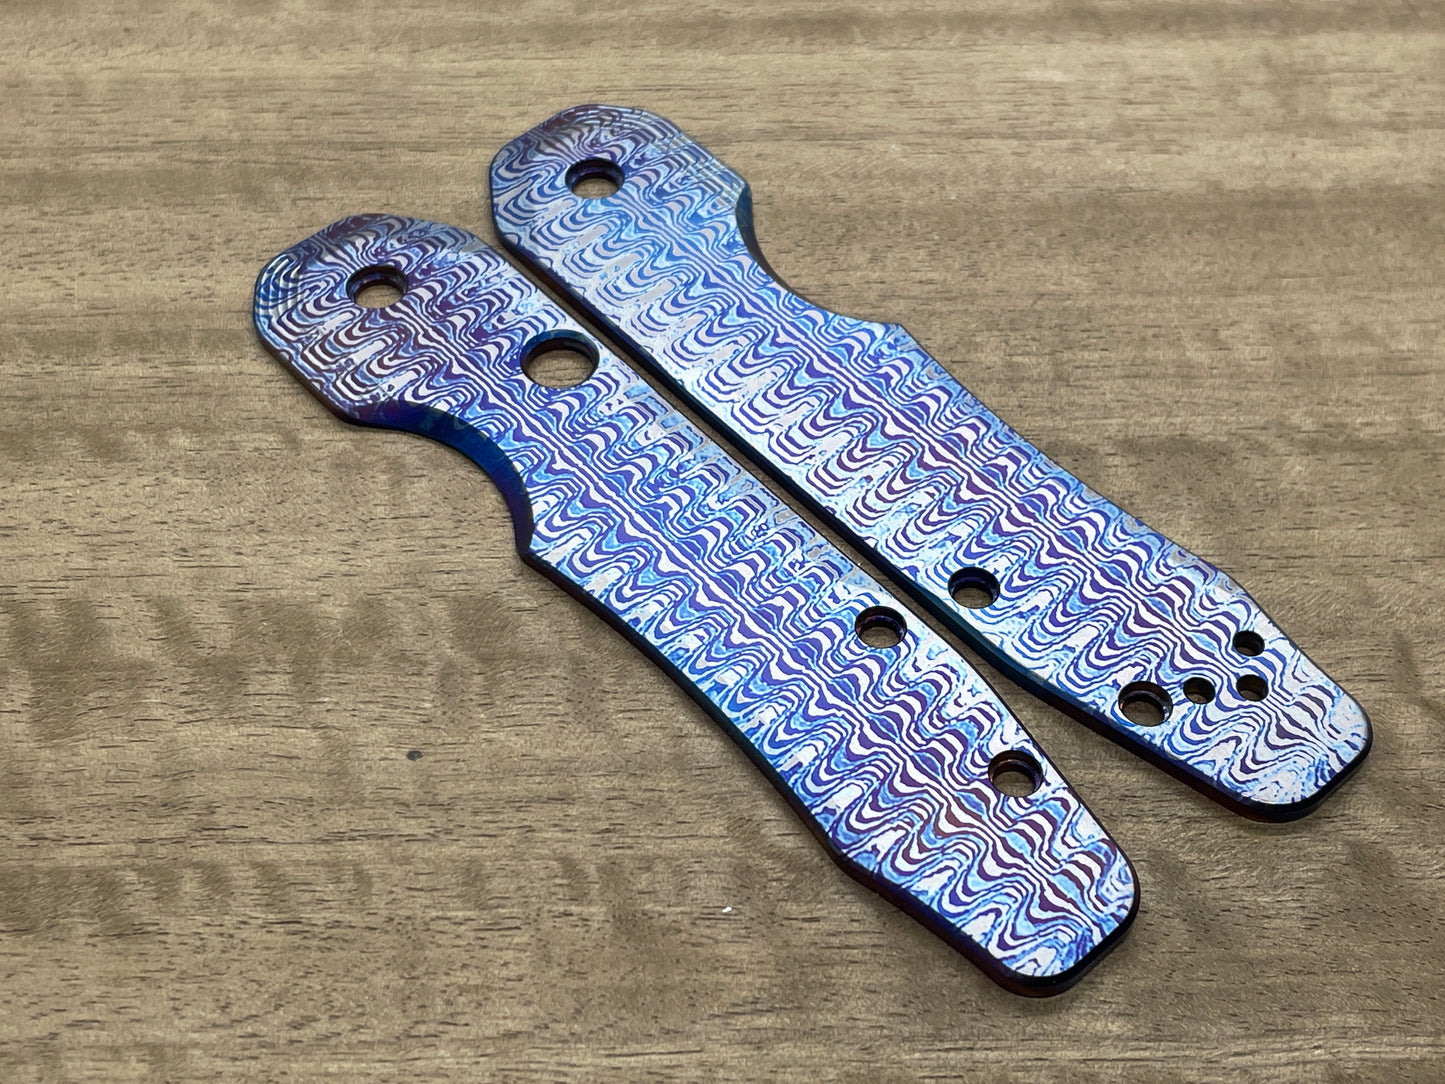 RIPPLE Flamed Titanium Scales for Spyderco SMOCK